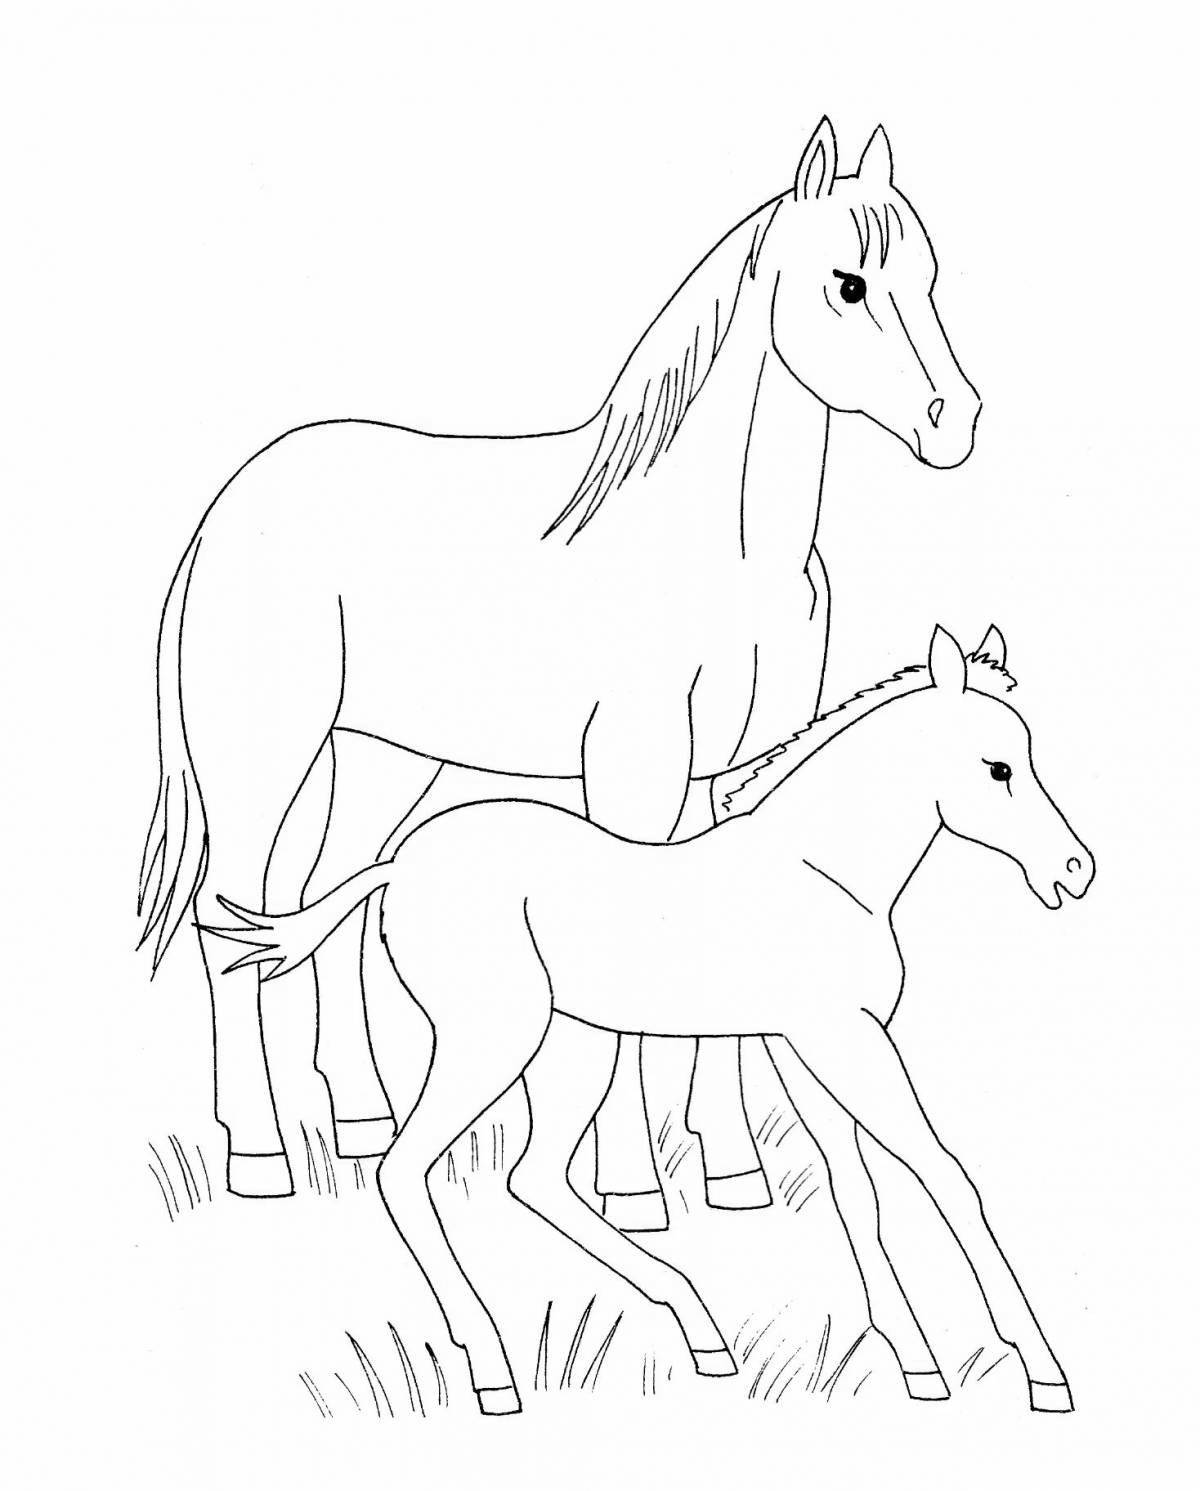 Rampant foal coloring pages for kids